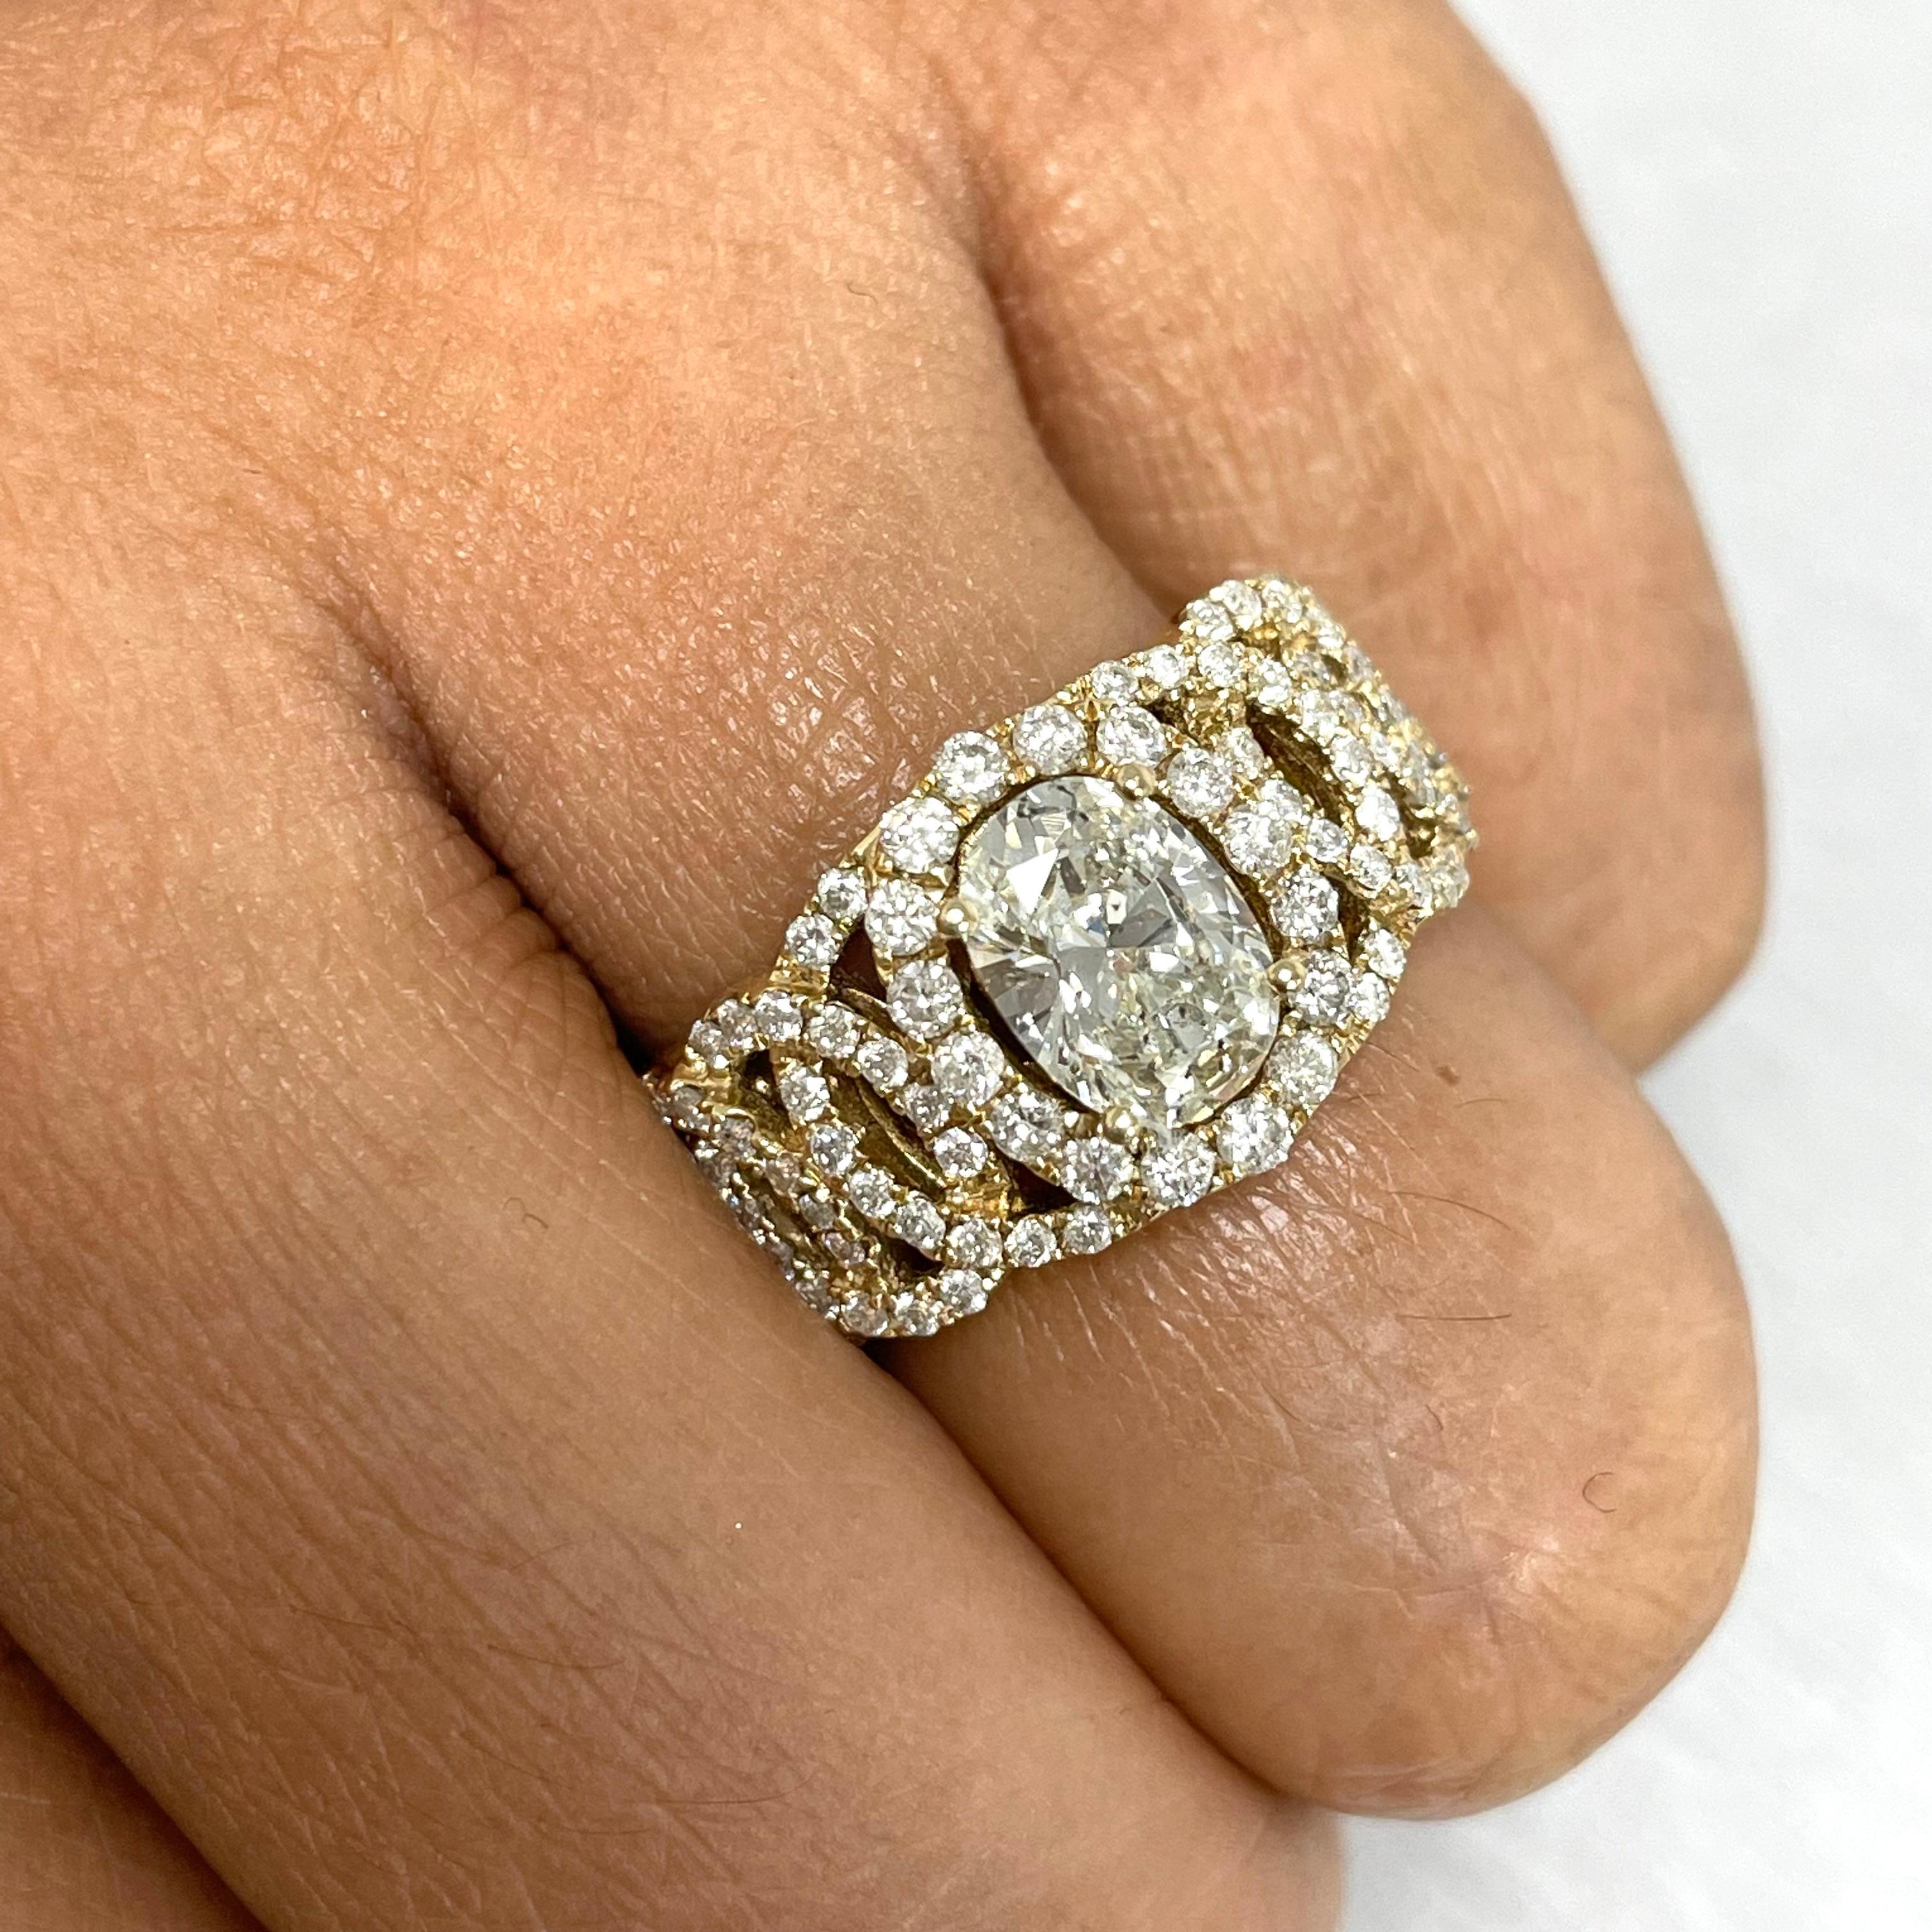 The Ripples engagement ring is one of a kind engagement or statement solitaire ring featuring bold rippling halo details on the shank. This unique ring exudes style and chic whether worn for an occasion or casually. 

Center Diamond Shape: